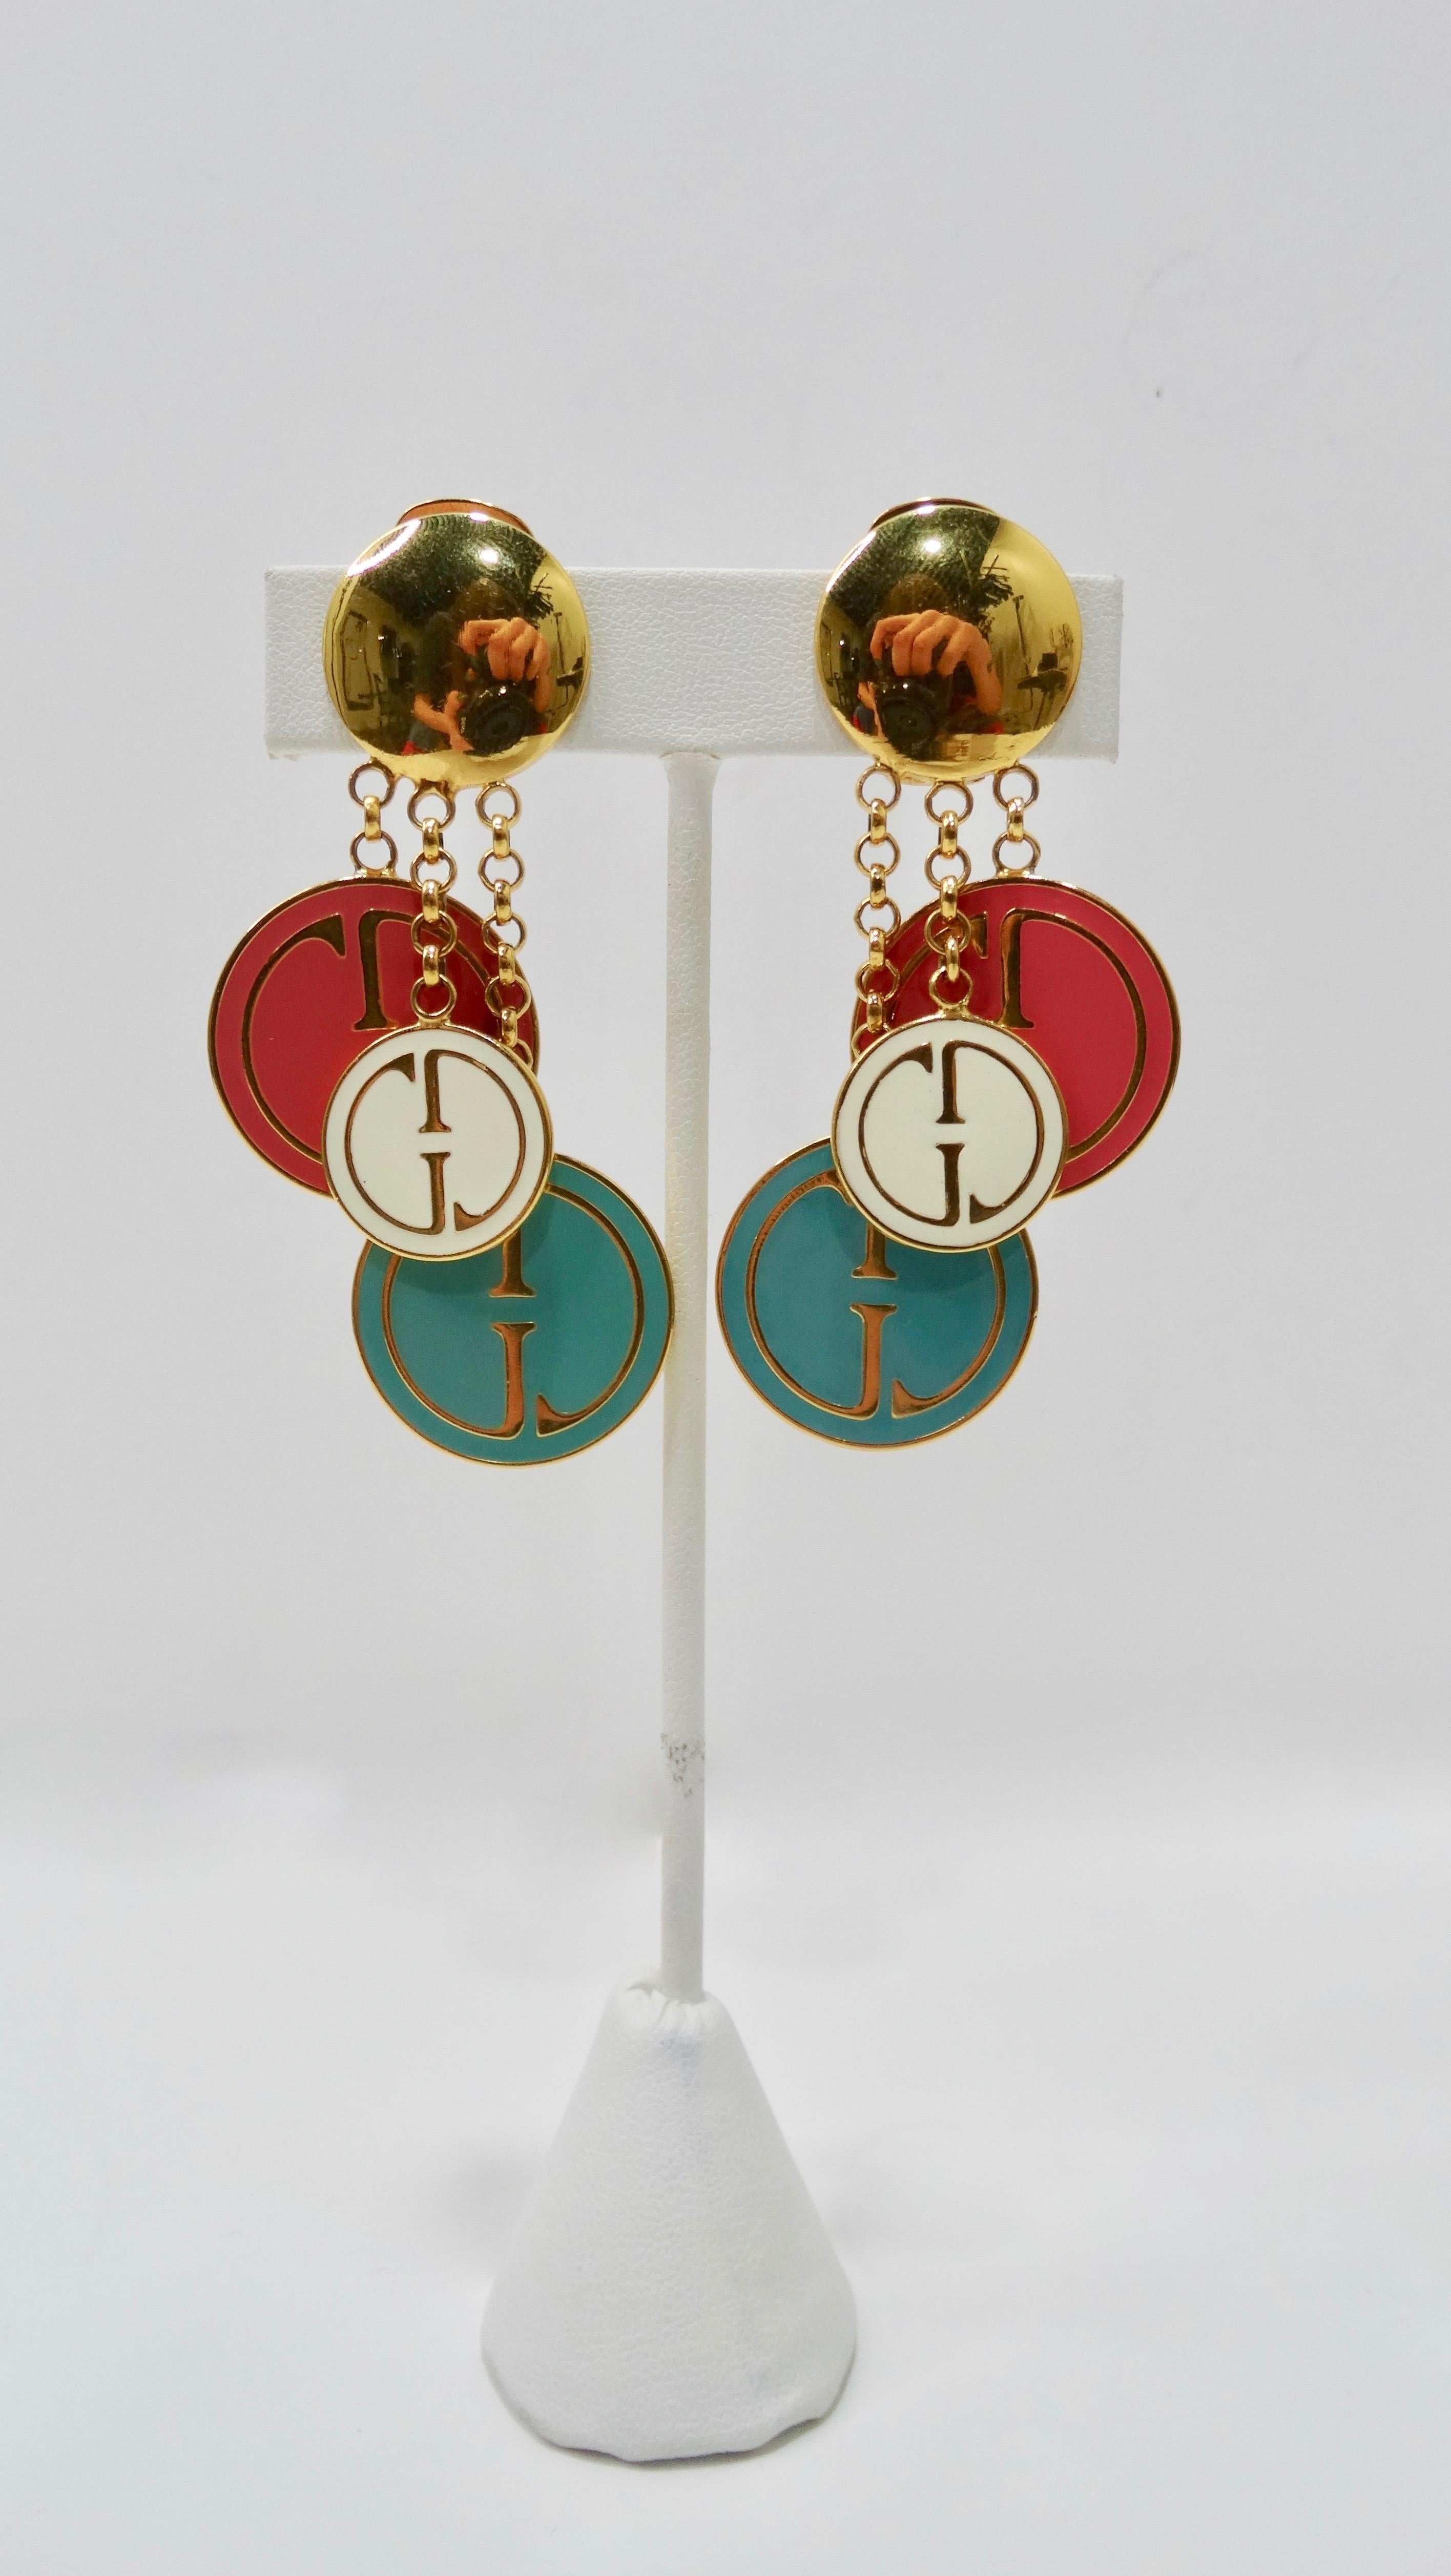 Add a new addition to your jewelry collection with these adorable Gucci earrings! Circa 1991, these gold toned dangle earrings revive the 1970s/1980s by featuring the vintage Gucci logo on white, pink and blue enamel embossed charms that hang freely